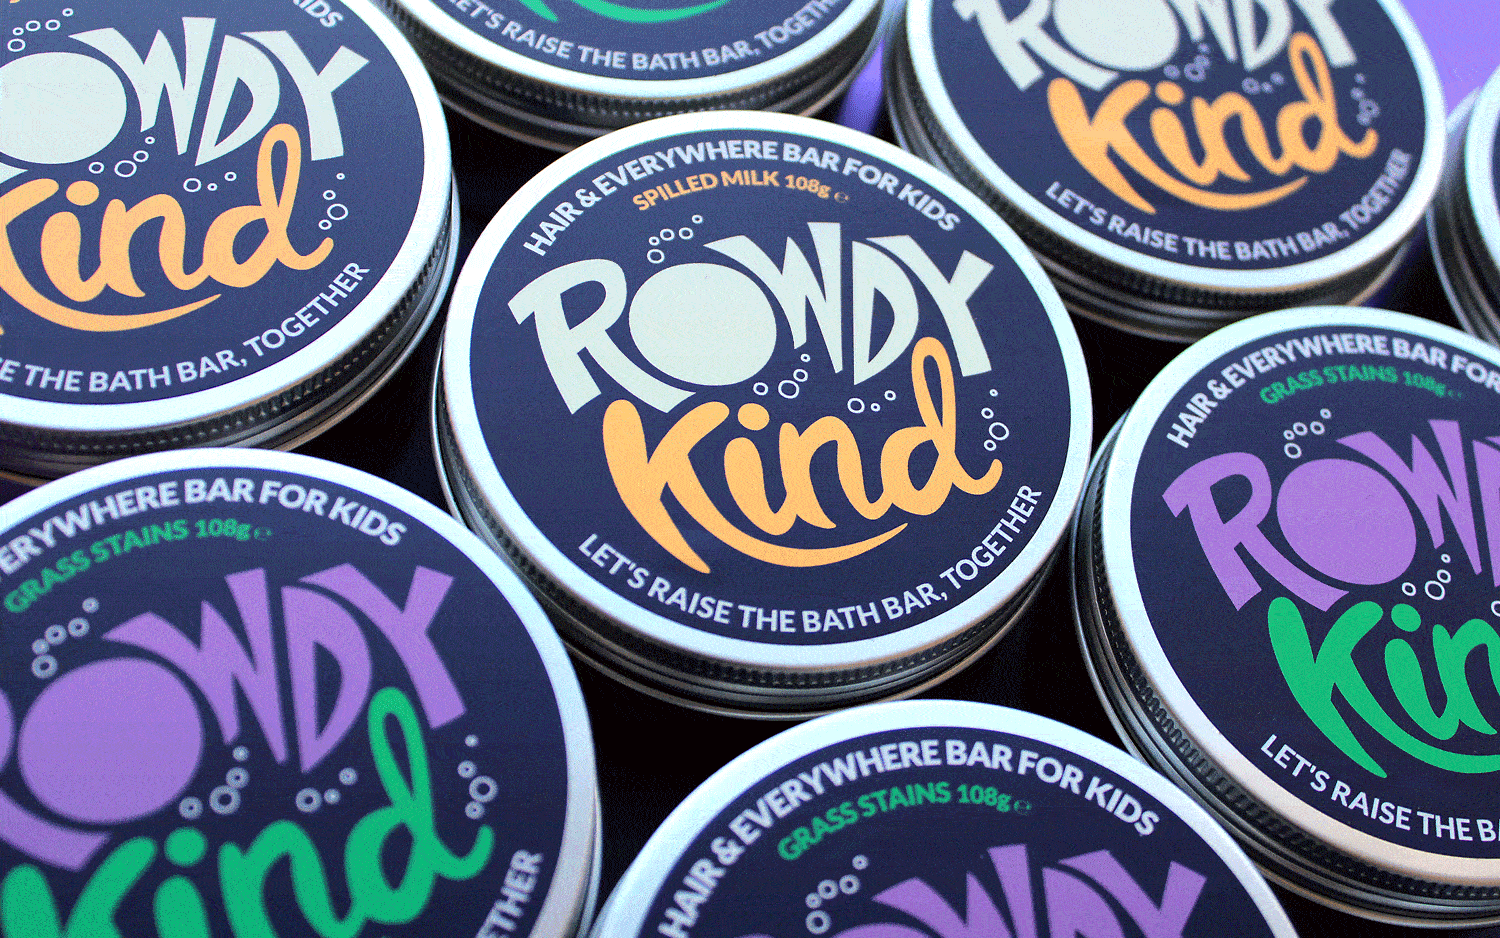 Taller Design Agency Rowdy Kind logo and packaging